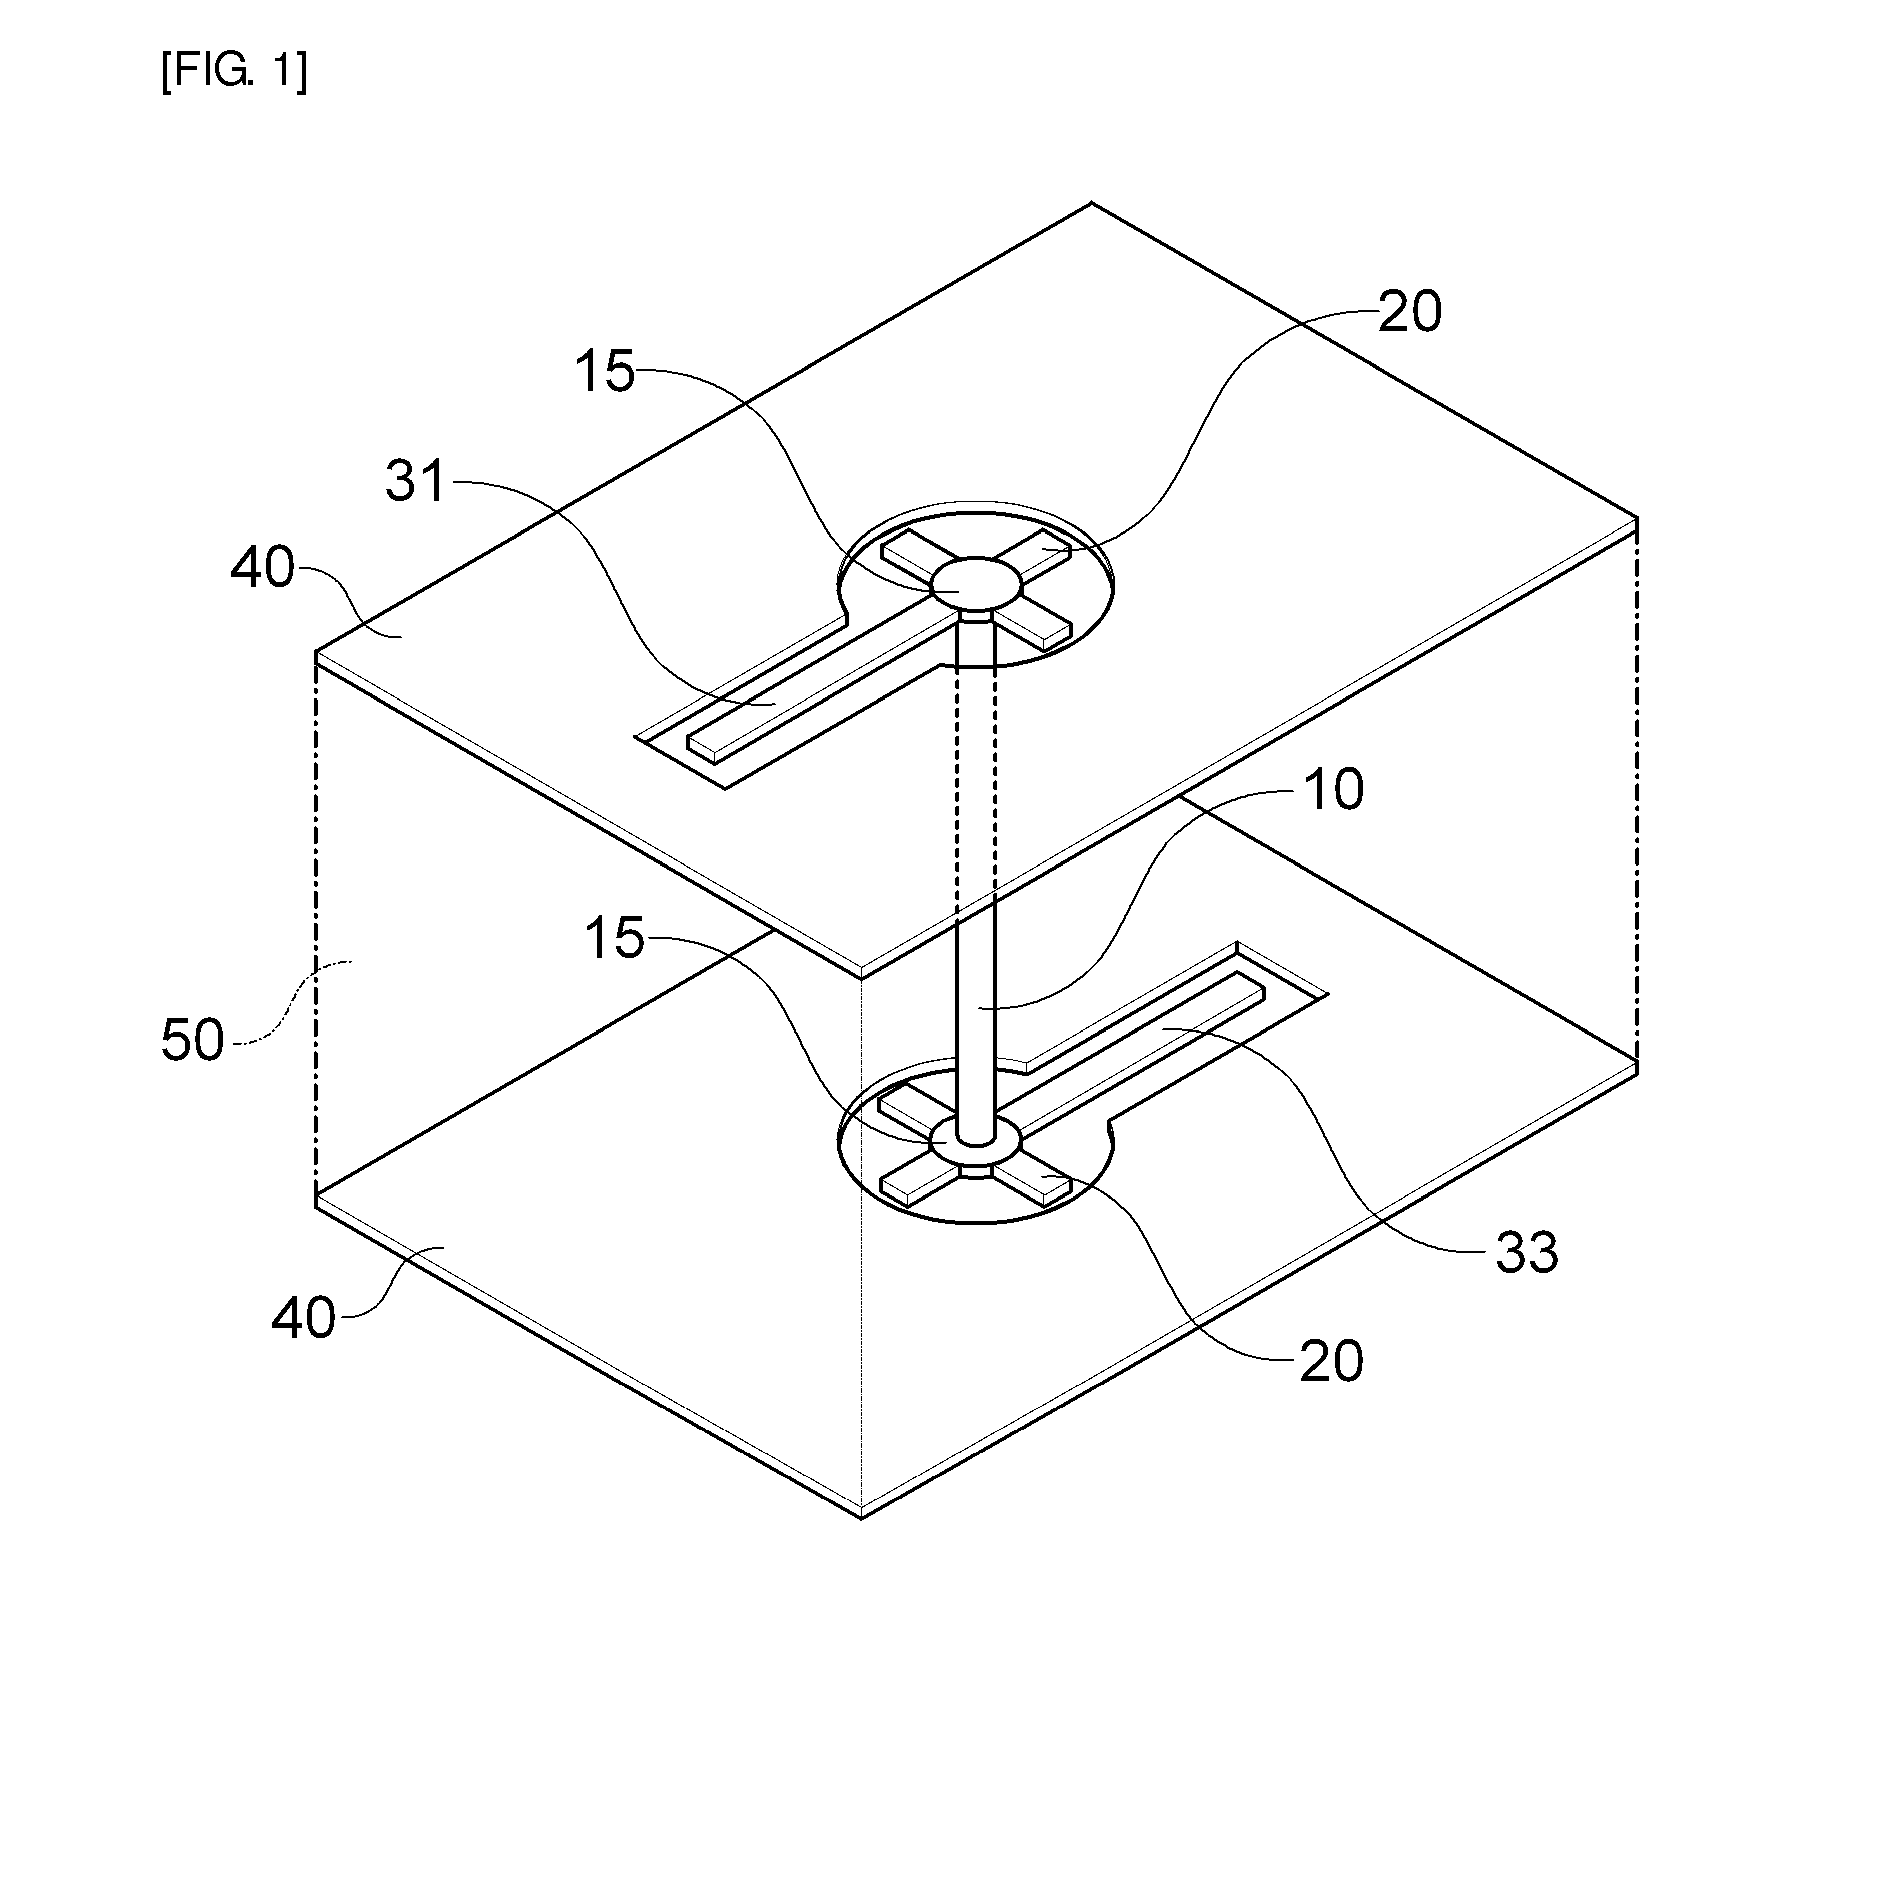 Via structure having open stub and printed circuit board having the same